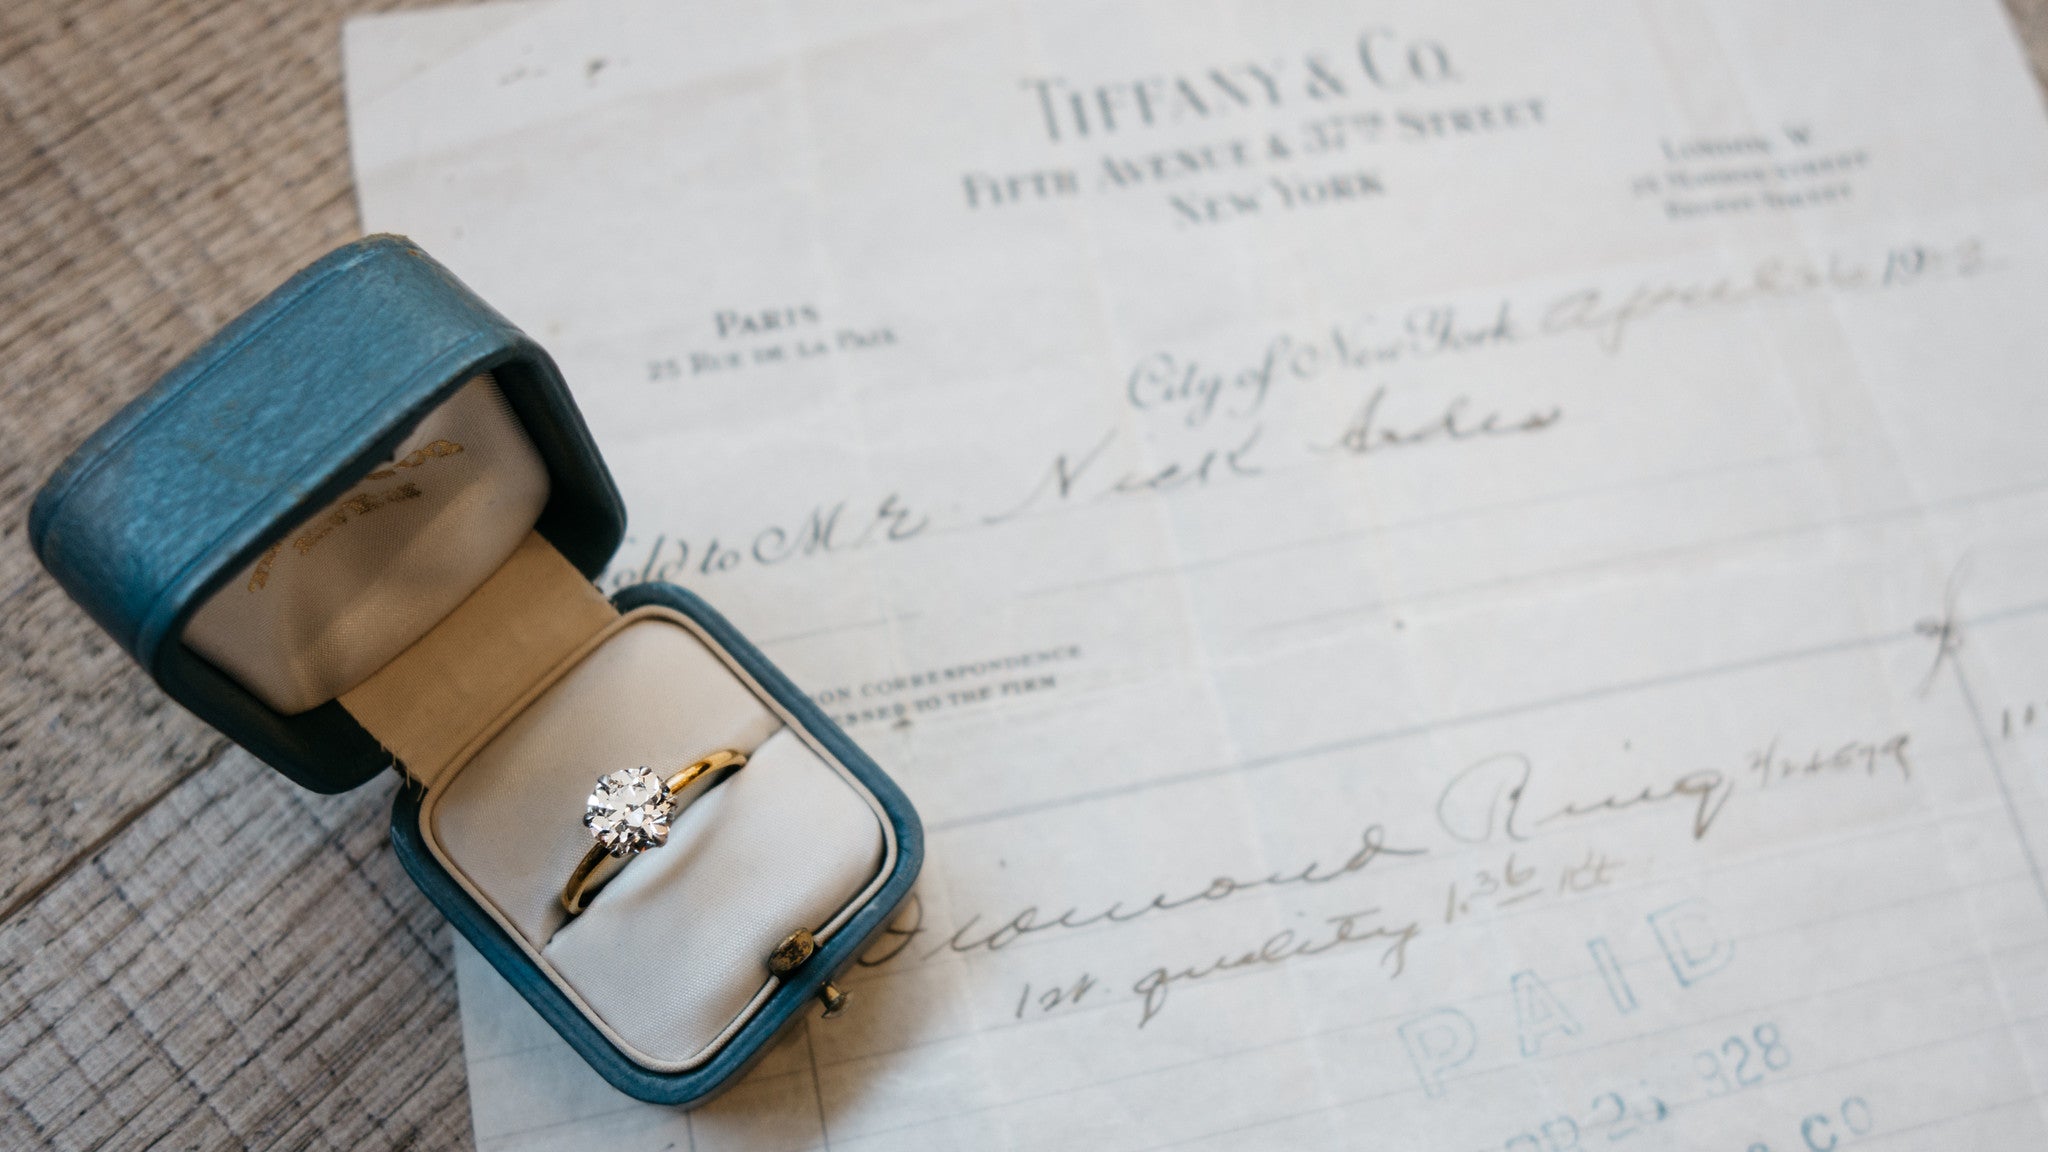 tiffany and co vintage